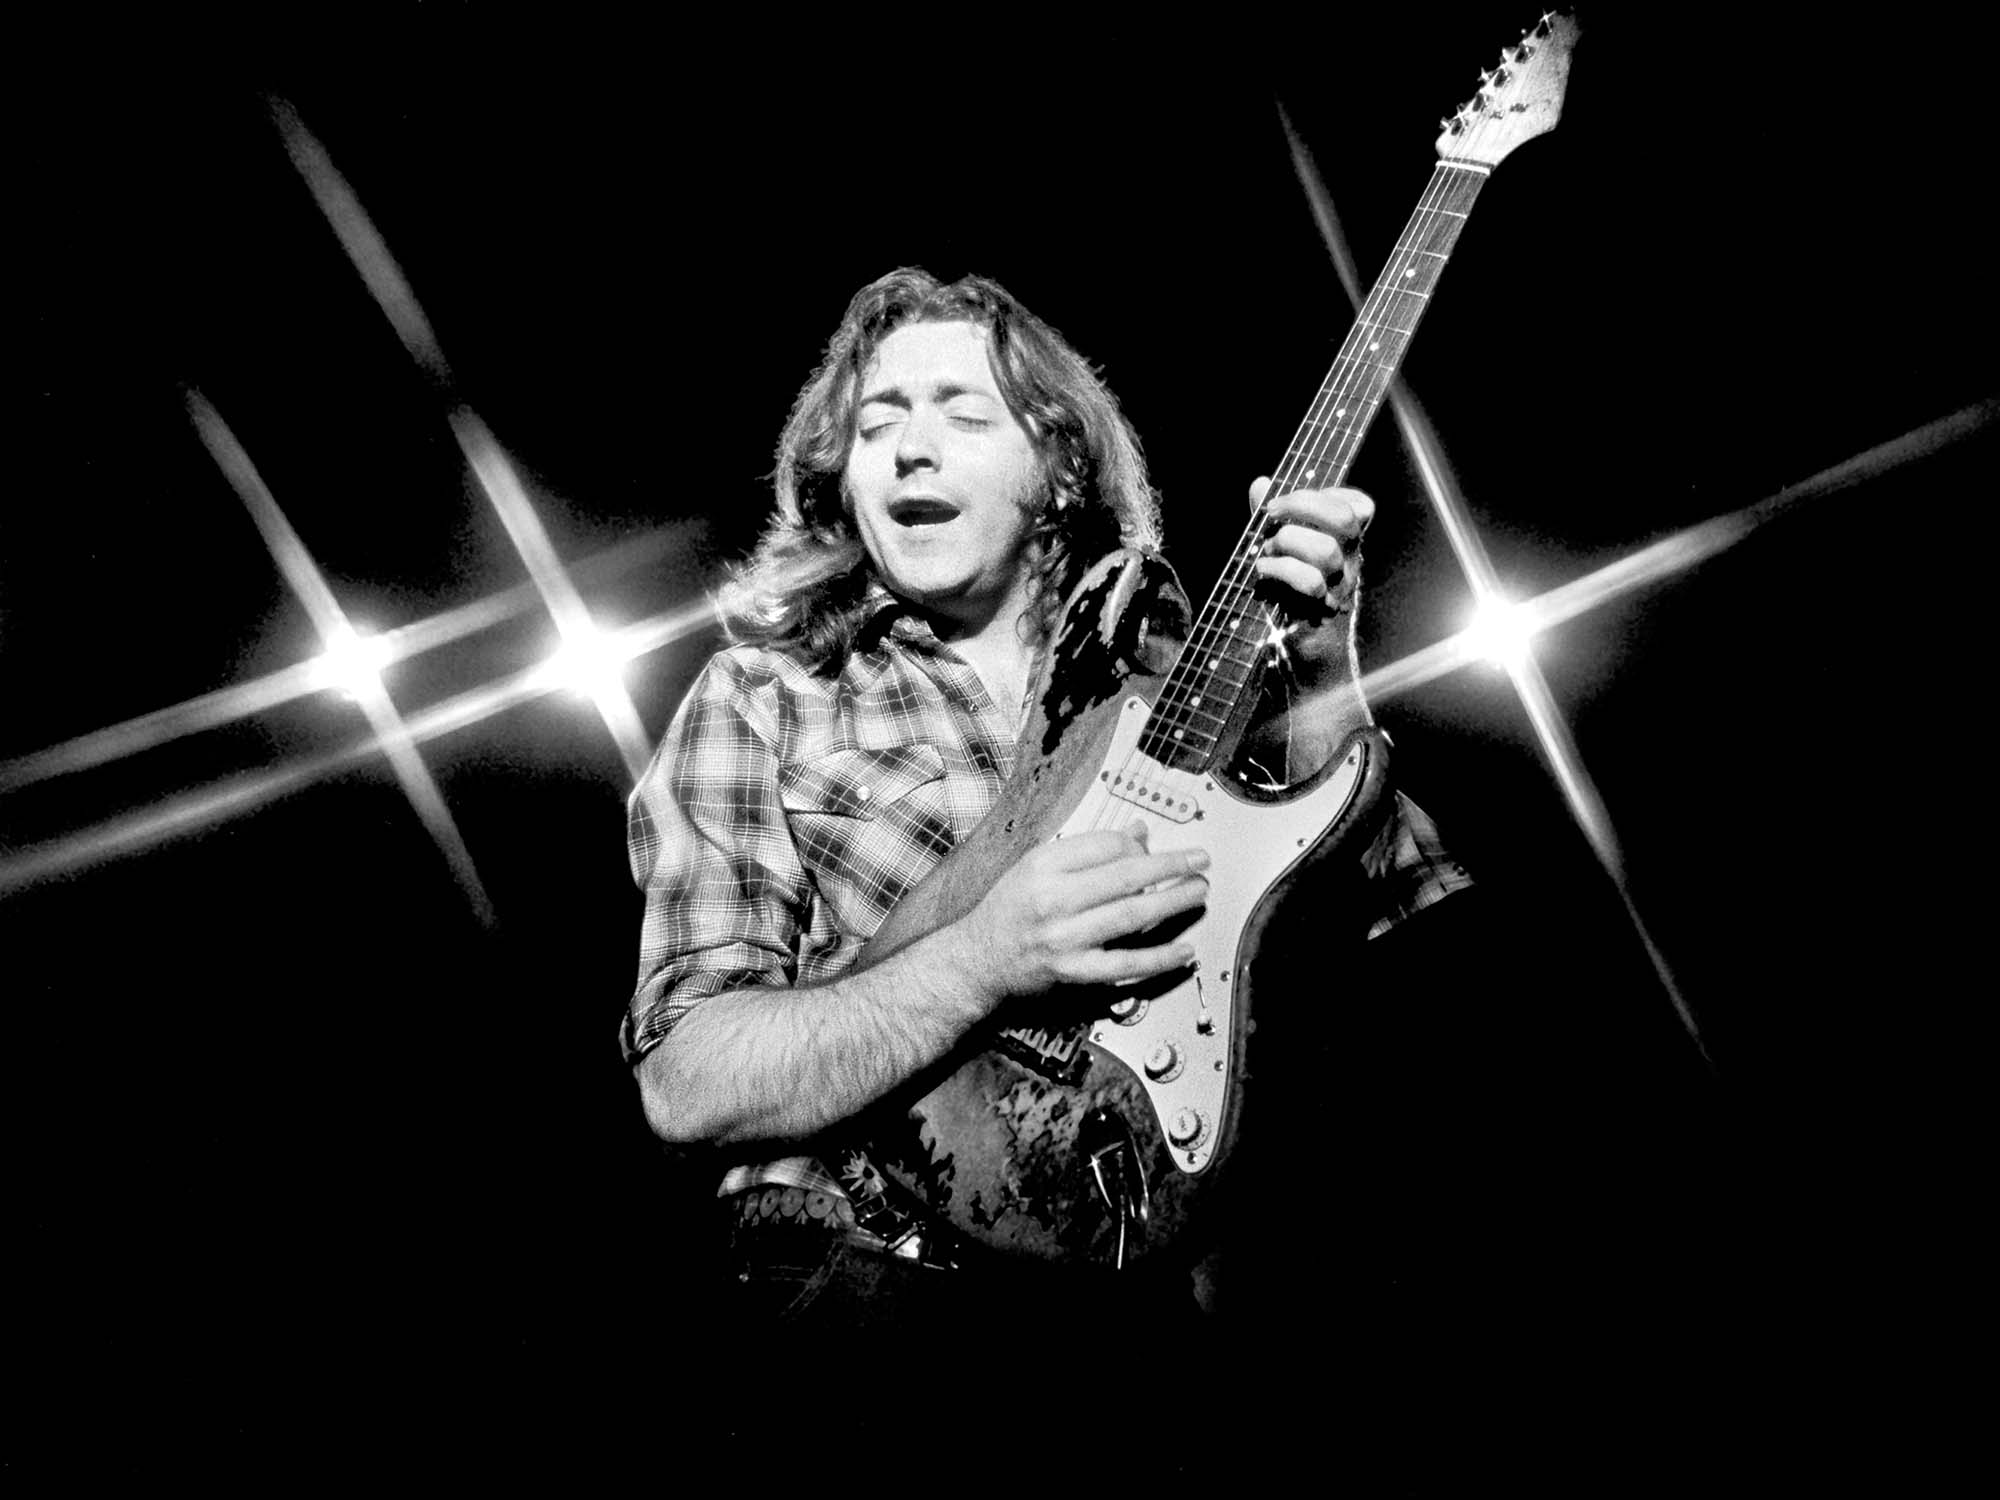 rory-gallagher-1979@2000x1500